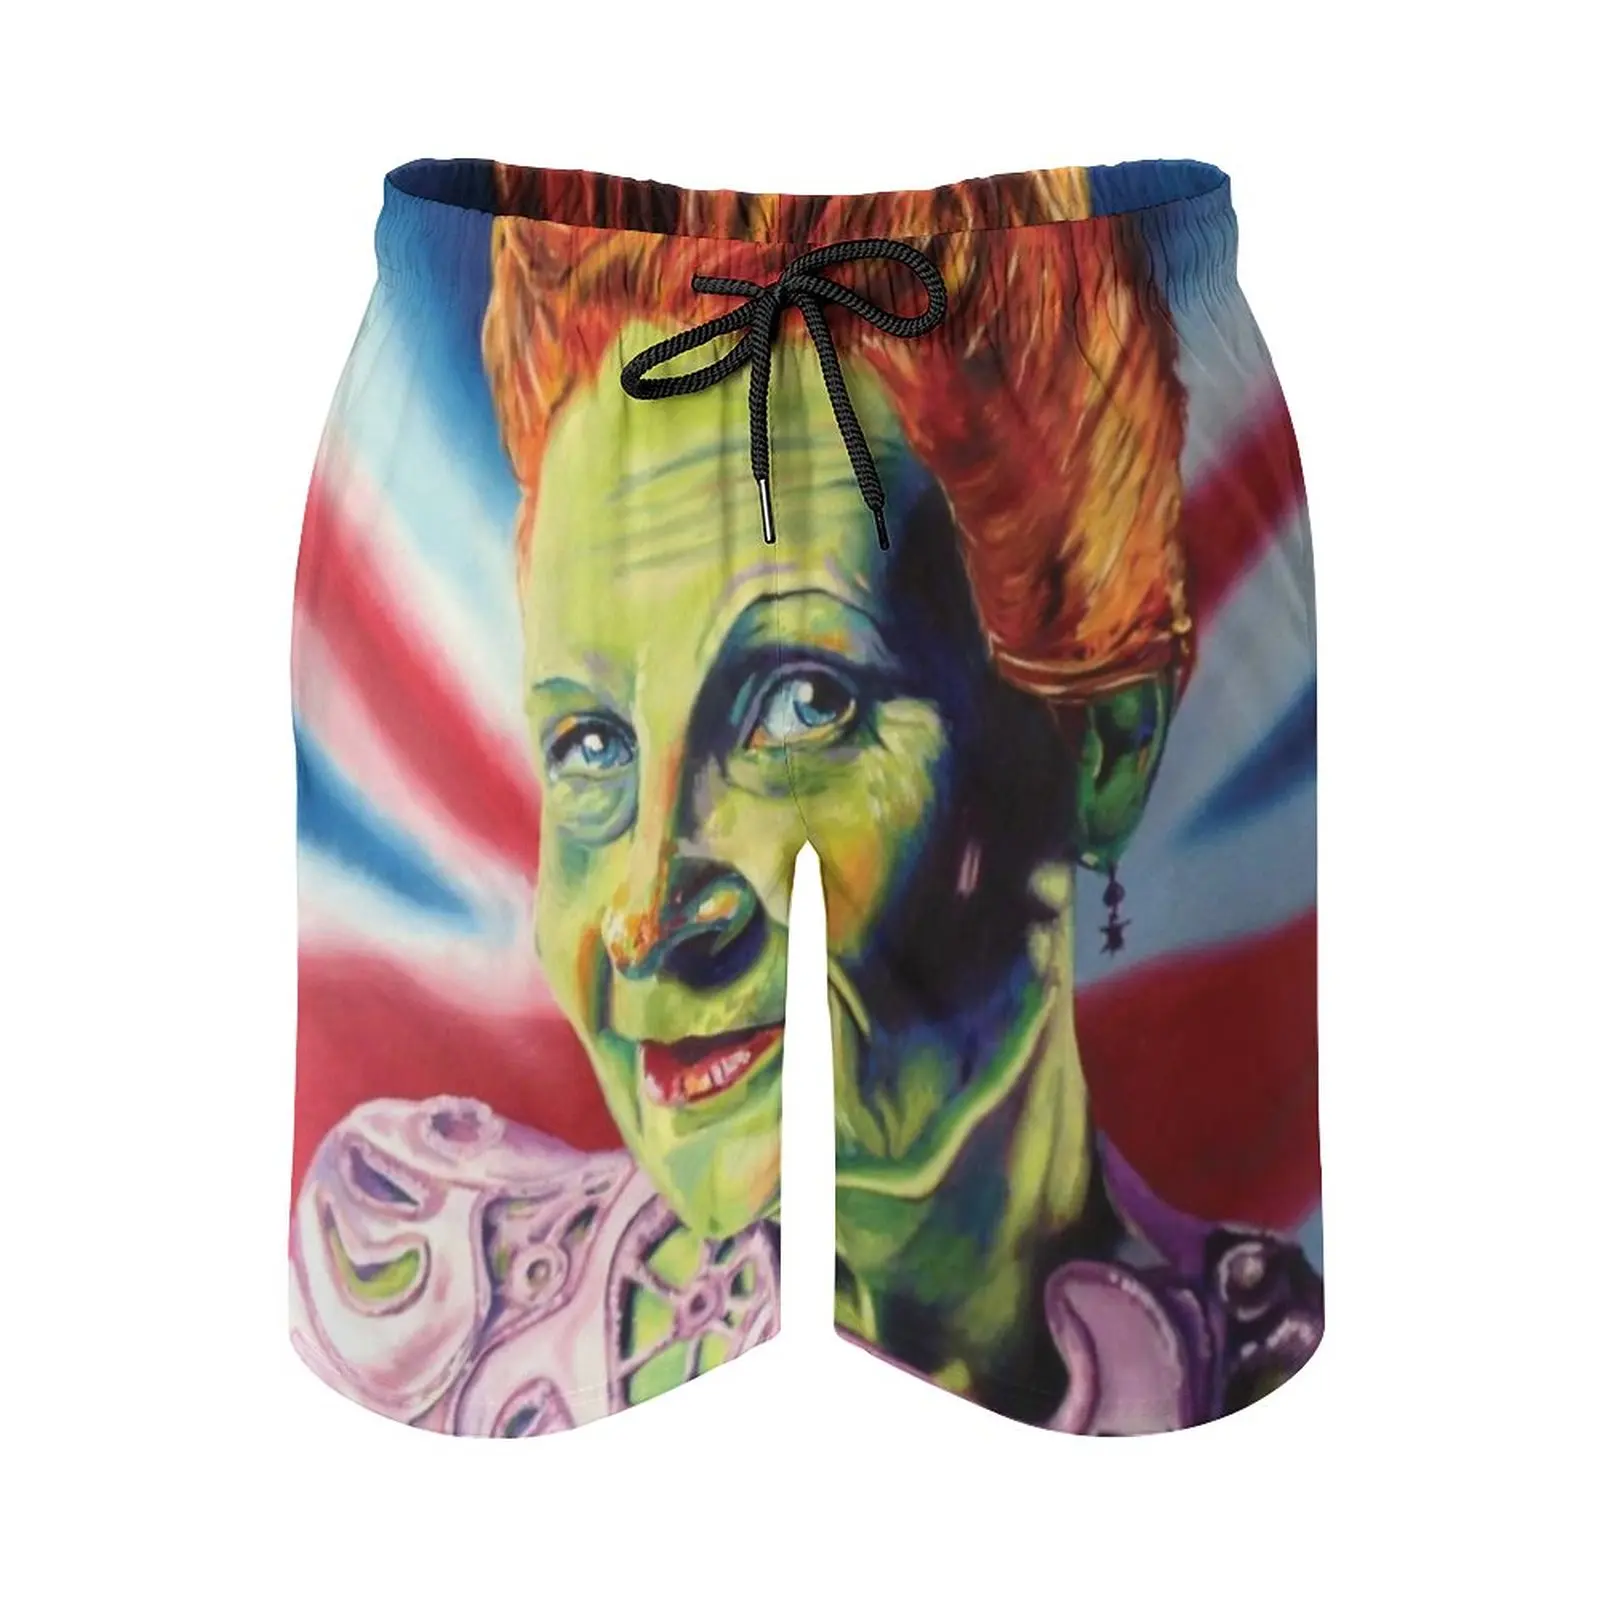 New Mens Swim Shorts Quick Dry Beach Board Swimwear Fashion Volley Shorts  Dame Vivienne Isabel Westwood Malcolm Mclarens